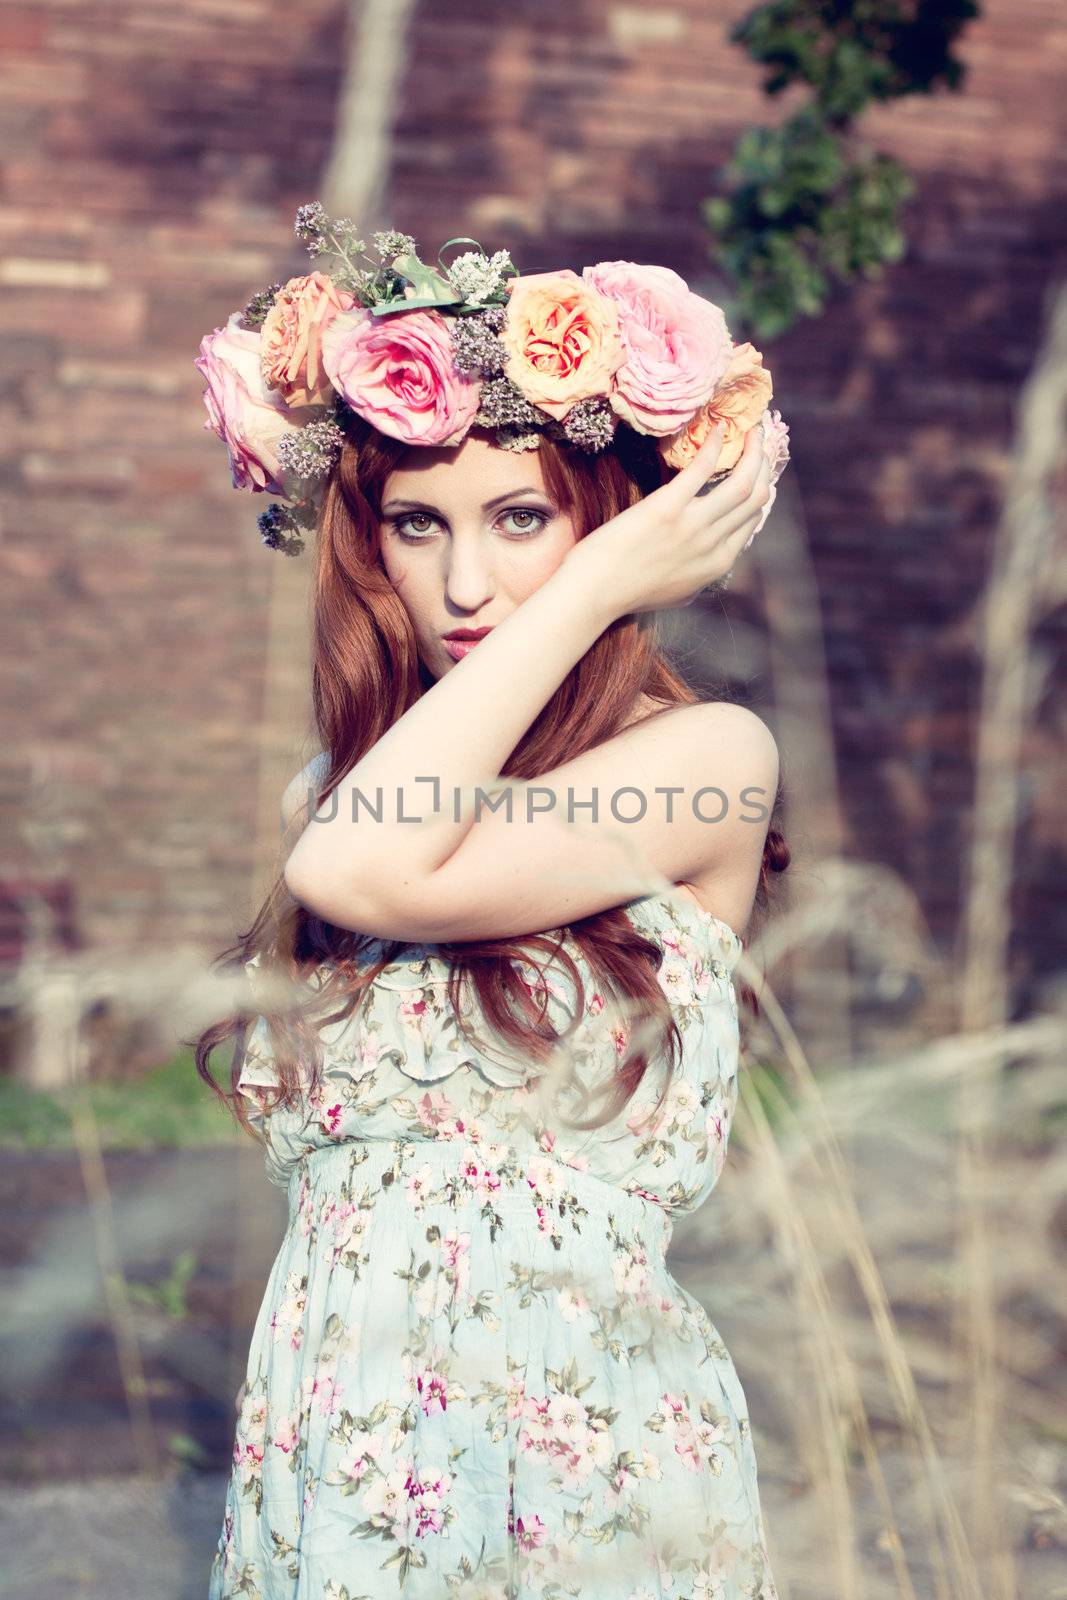 beautfiul woman outdoor in summer with flowers on head romantic fashion